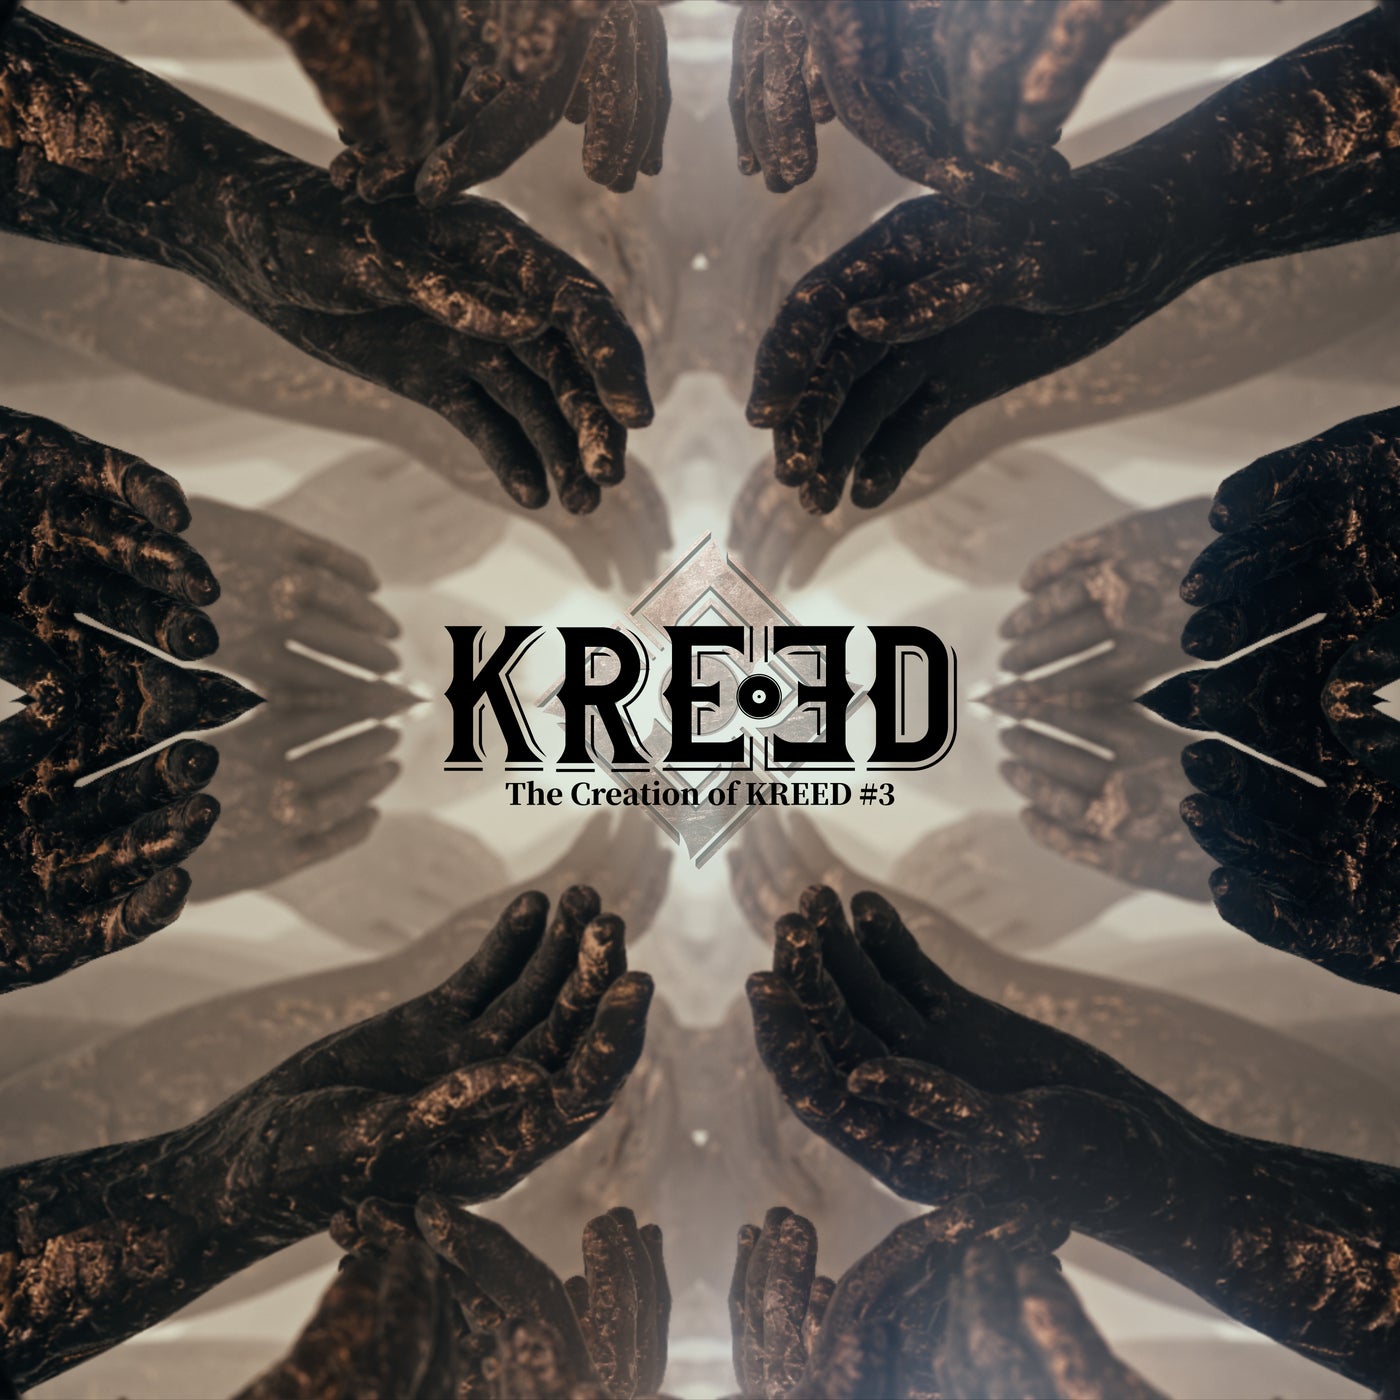 The Creation of KREED #3